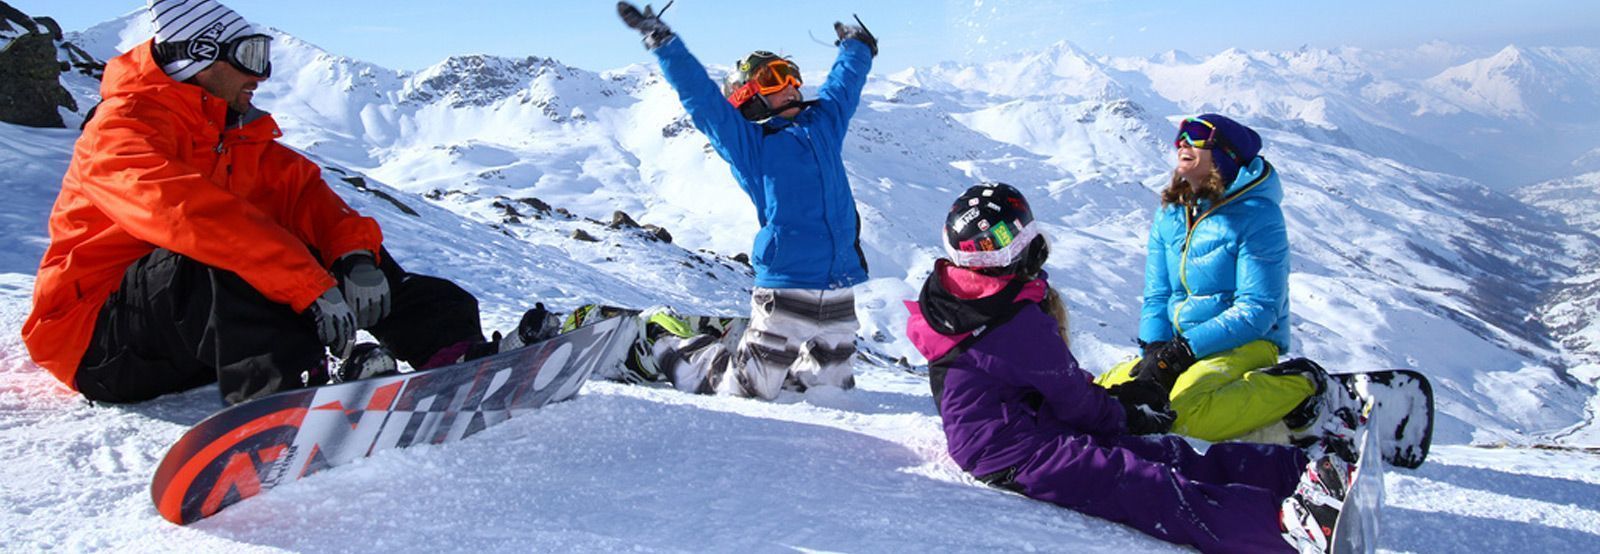 Snowboarding Holidays and Trips